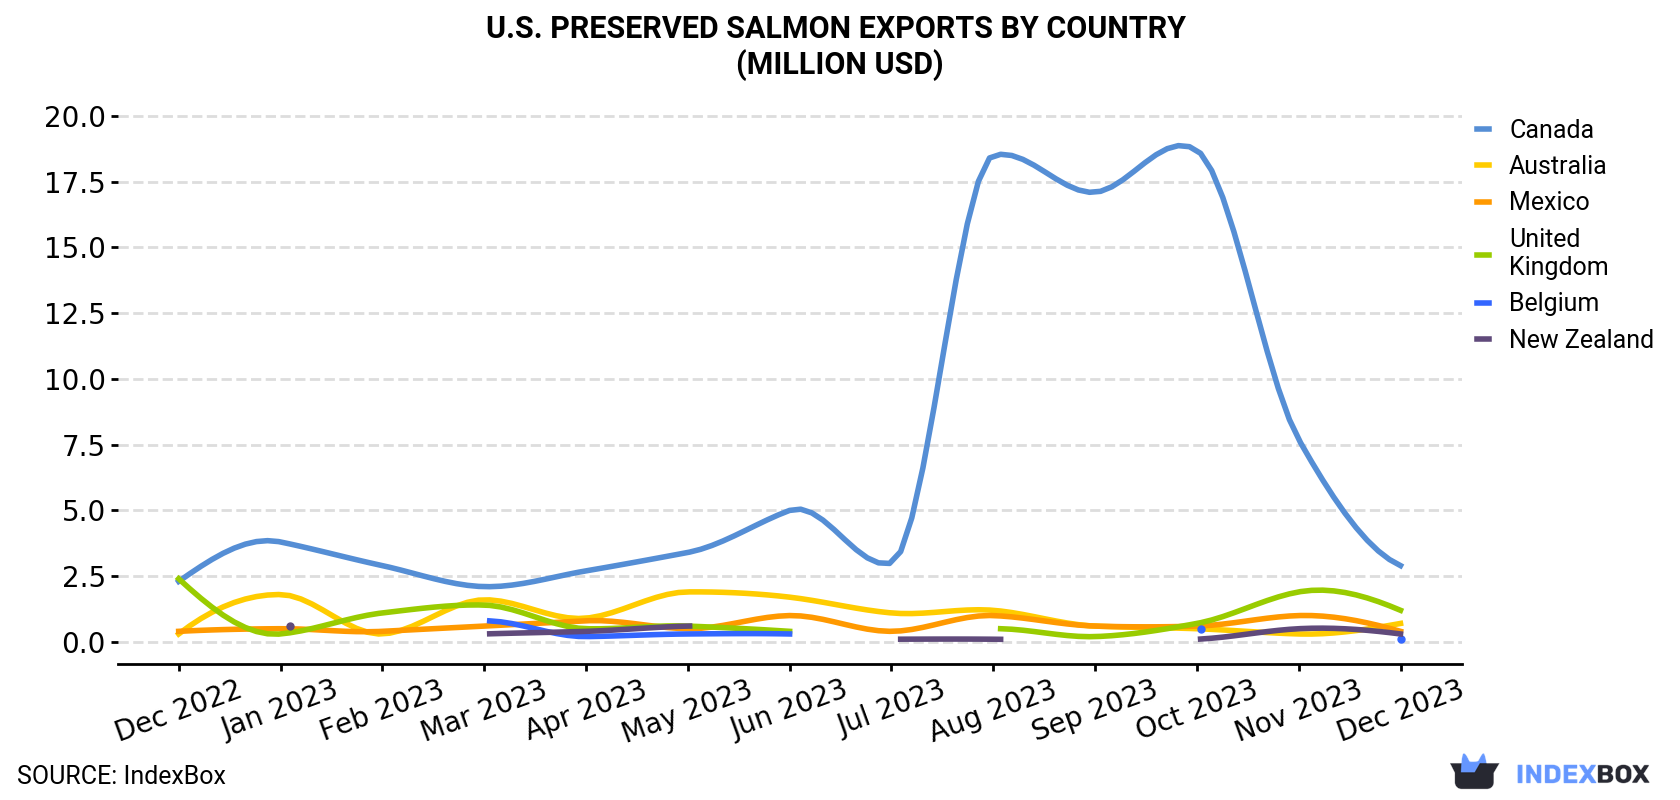 U.S. Preserved Salmon Exports By Country (Million USD)